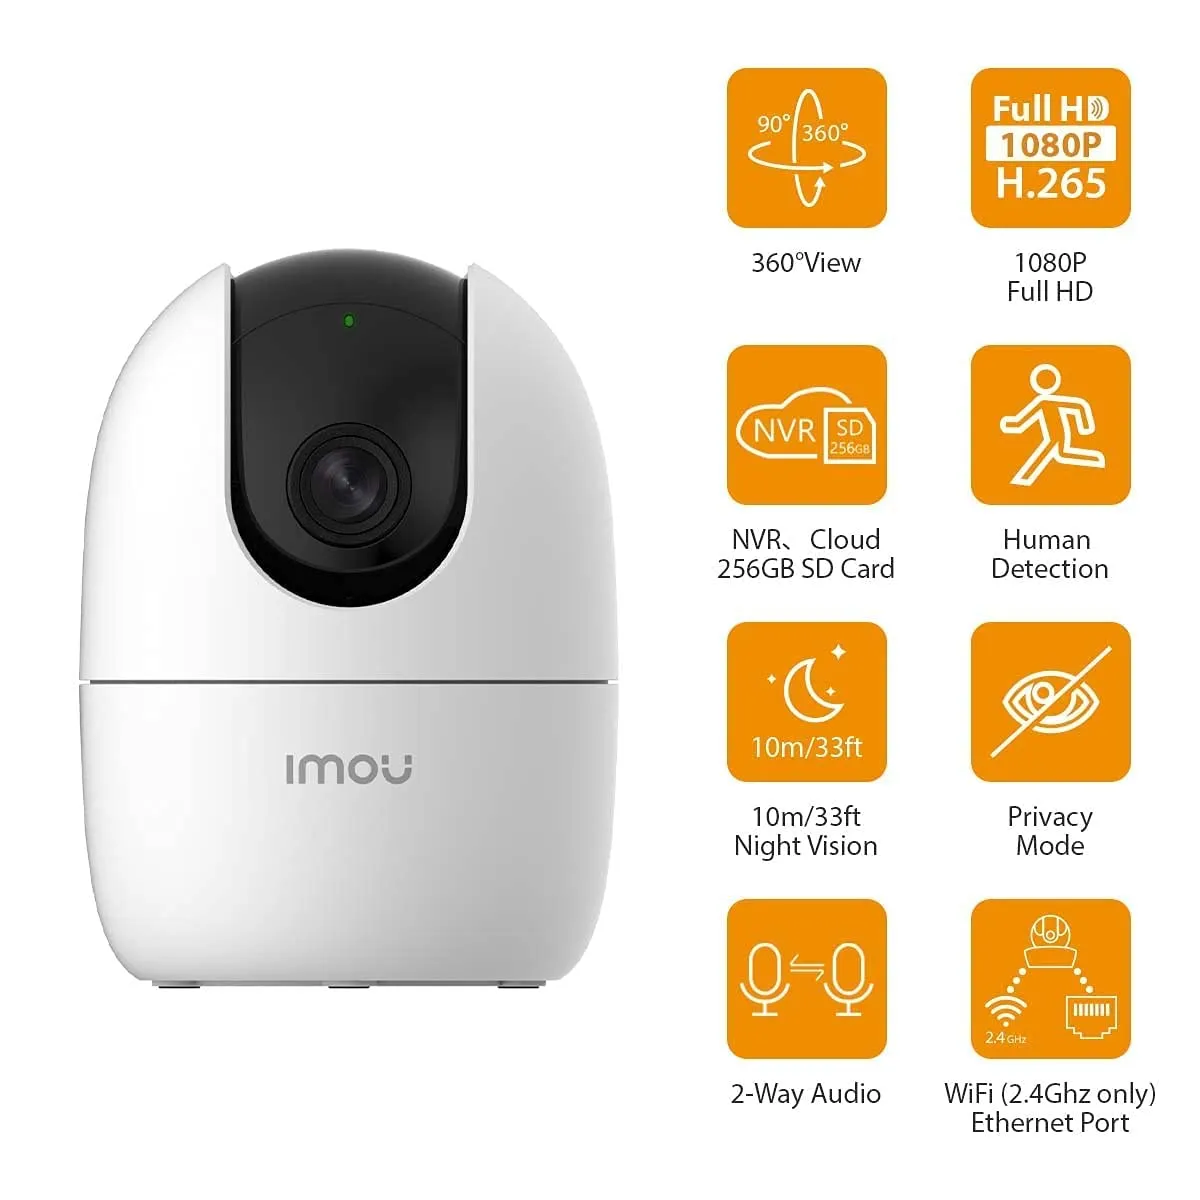 IMOU Ranger 2-D Smart Wifi Camera, 360° Coverage and Smart Tracking Privacy Mode, Supporting Both Wi-Fi and LAN Connectivity, IPC-A22EP-D Ranger 2-D